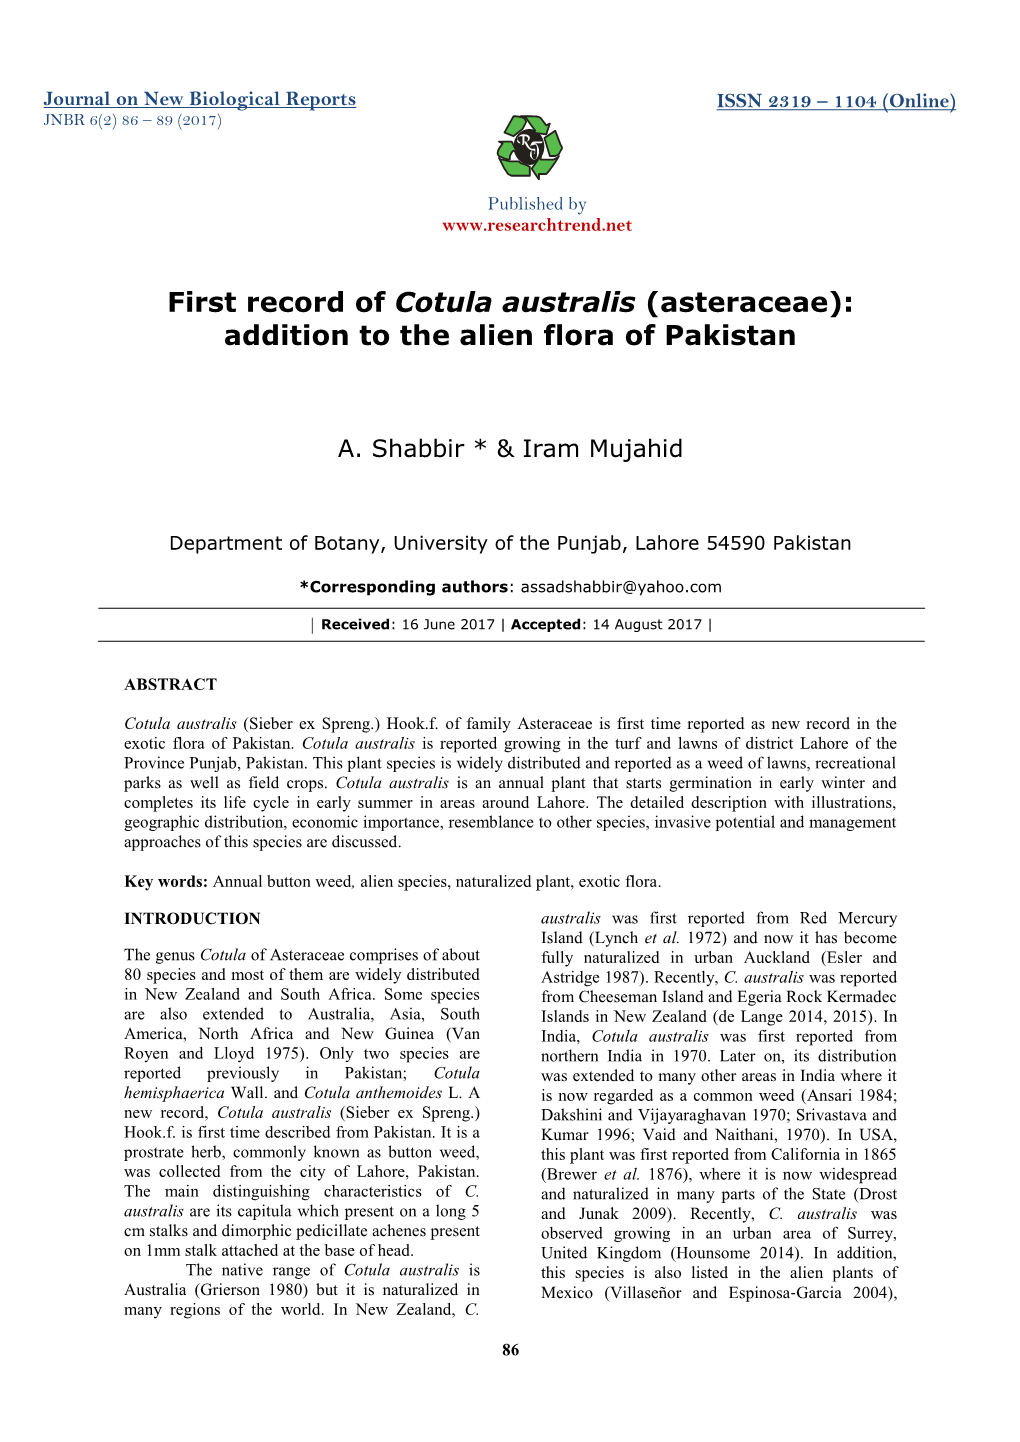 First Record of Cotula Australis (Asteraceae): Addition to the Alien Flora of Pakistan